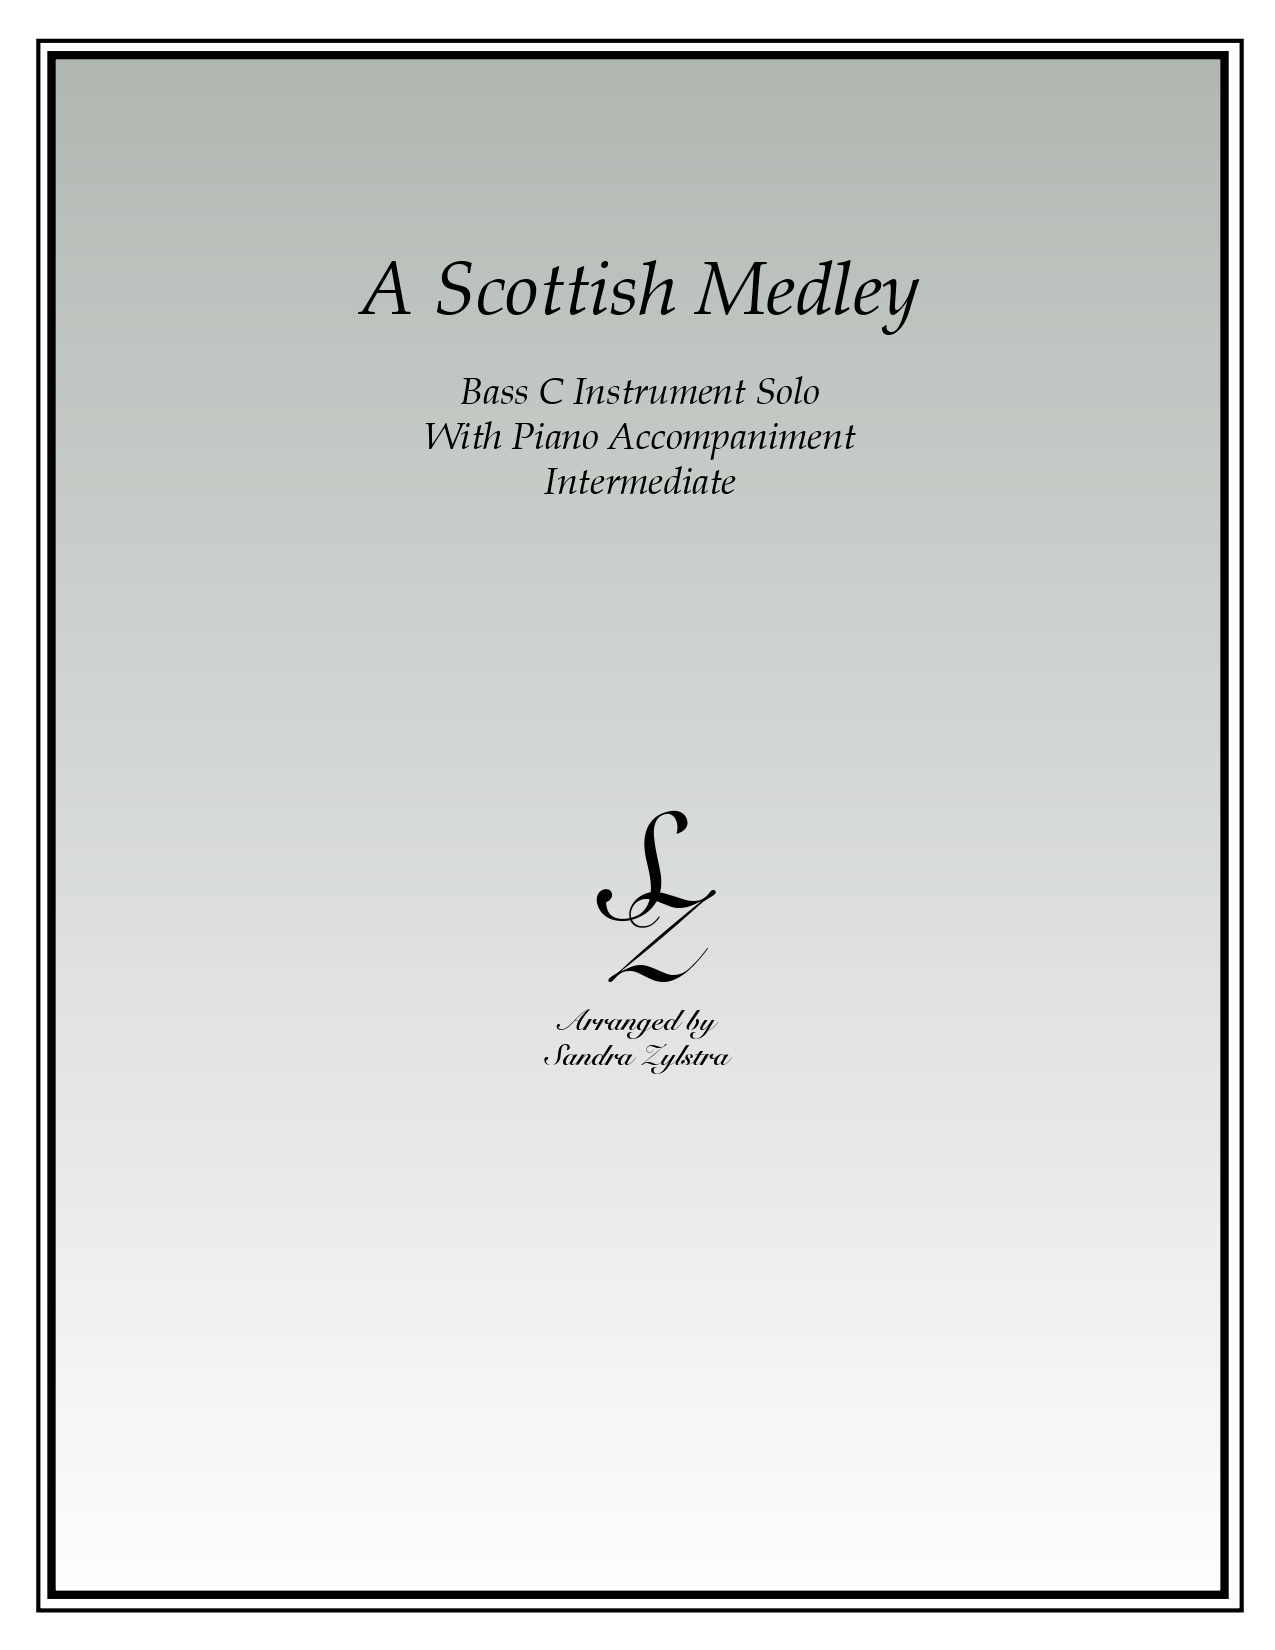 A Scottish Medley bass C instrument solo part cover page 00011